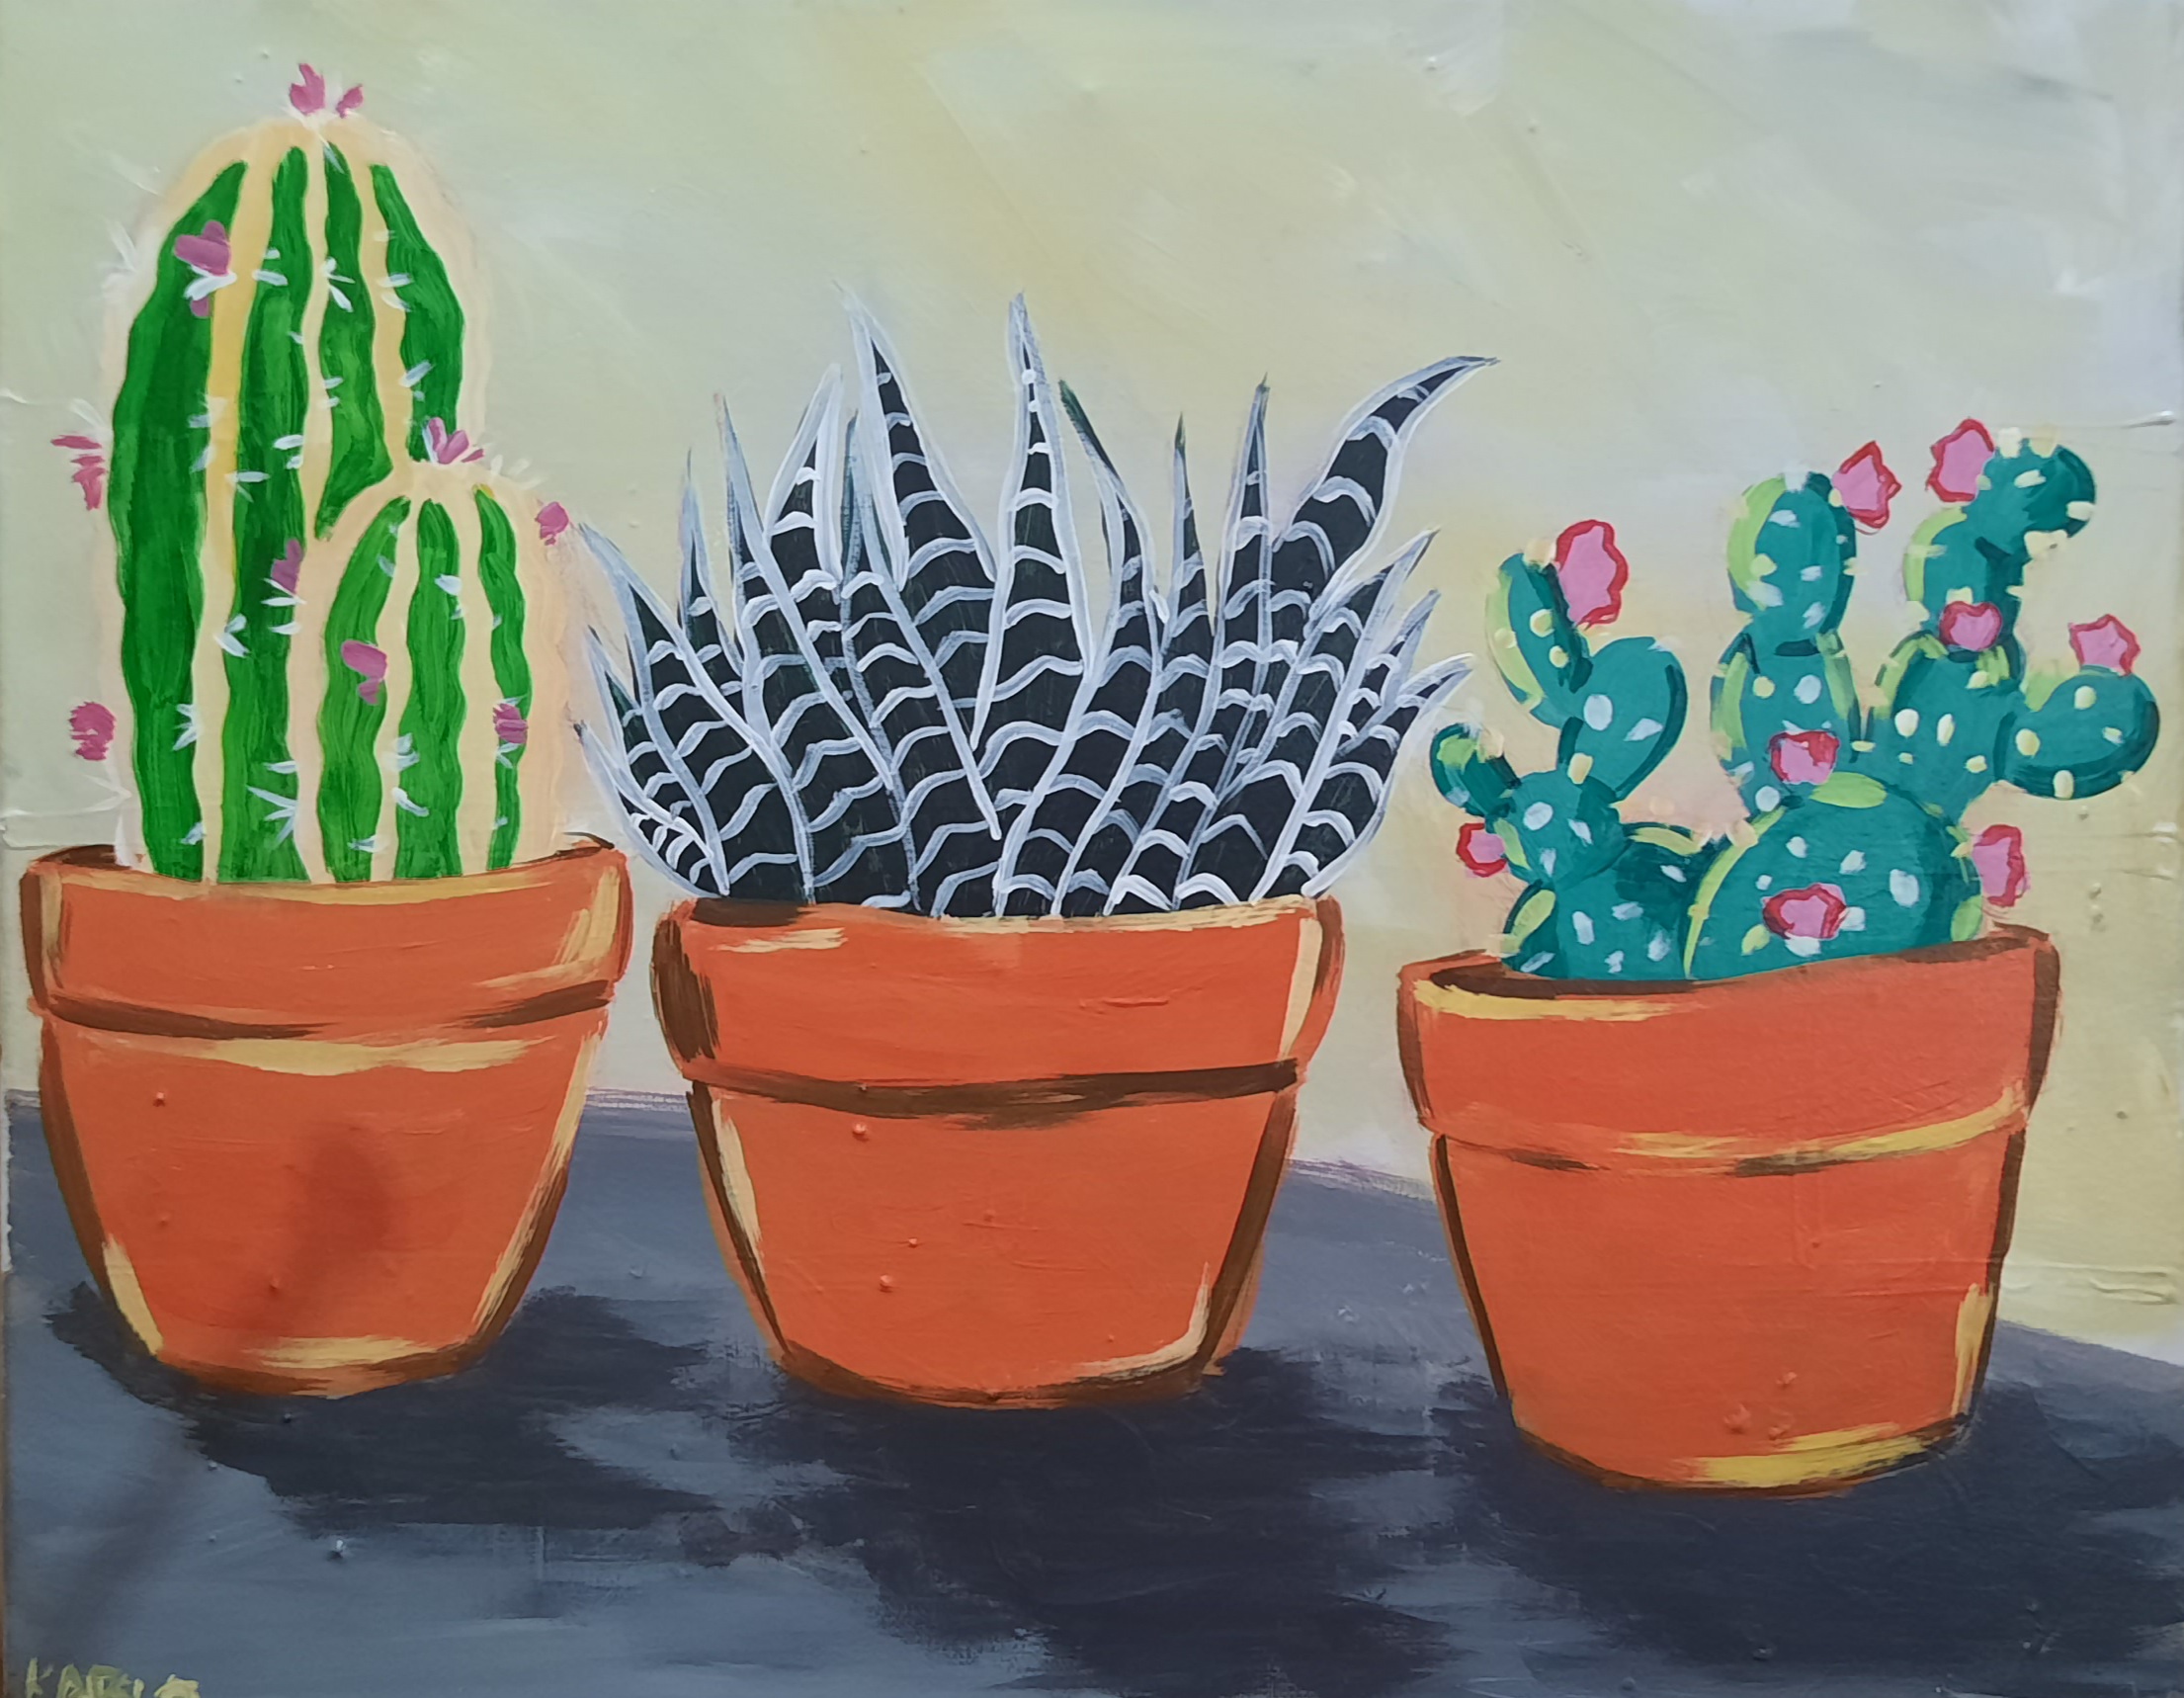 Prickly Life July 10th 6 p.m.